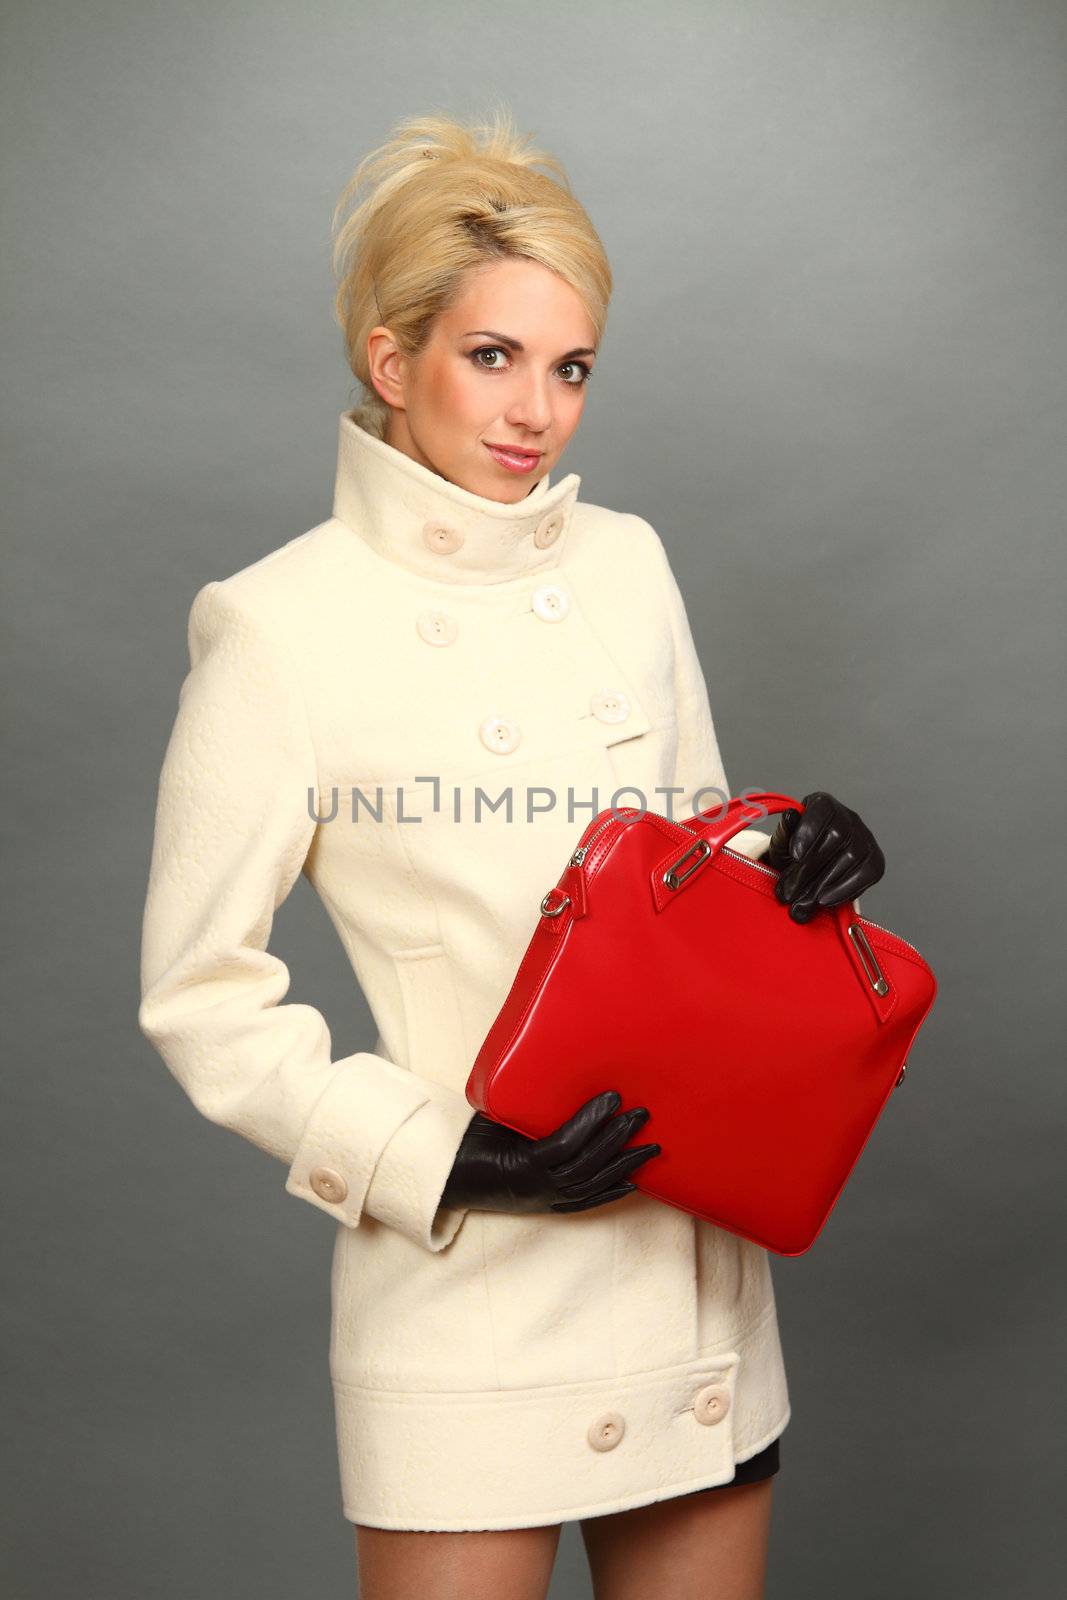 The beautiful blonde in a light coat and black leather gloves with a red handbag in hands